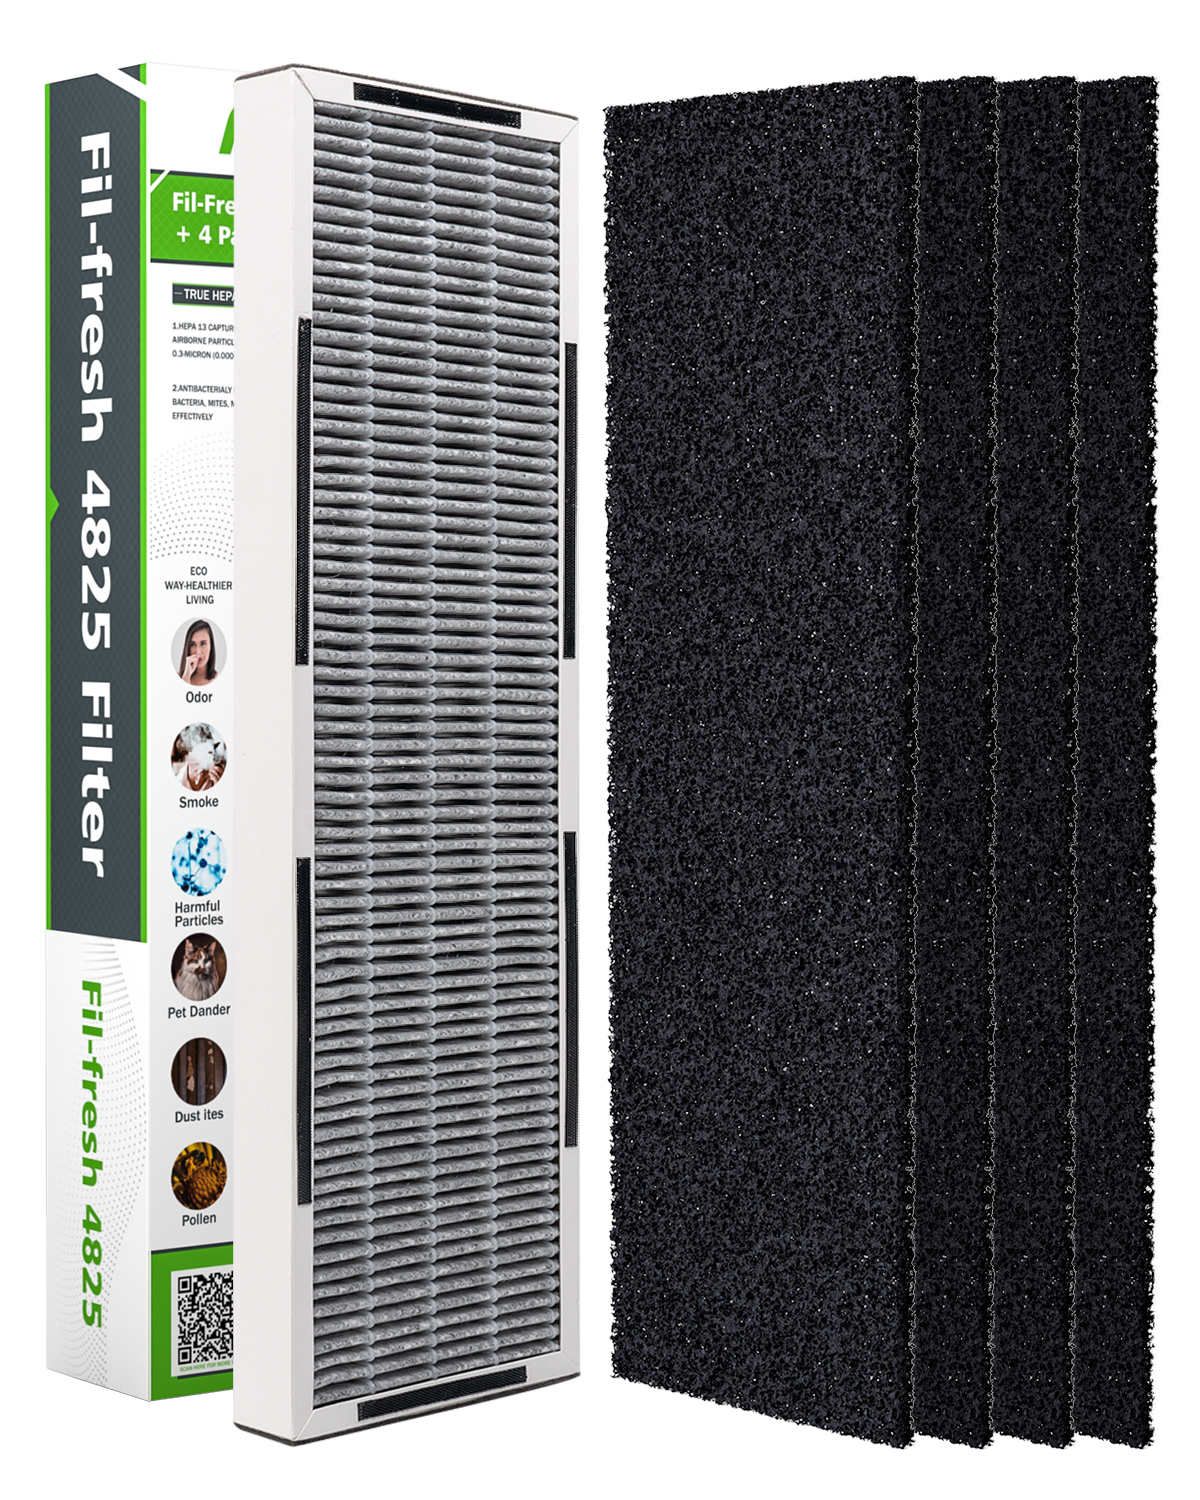 Fil-fresh High-Efficiency HEPA Filter FLT4825, 1 Pack Carbon True HEPA Filter with 4 x Pre-Filters Compatible with Germ Guardian AC4825 Air Purifier, 12-Month Advanced Replacement Kit